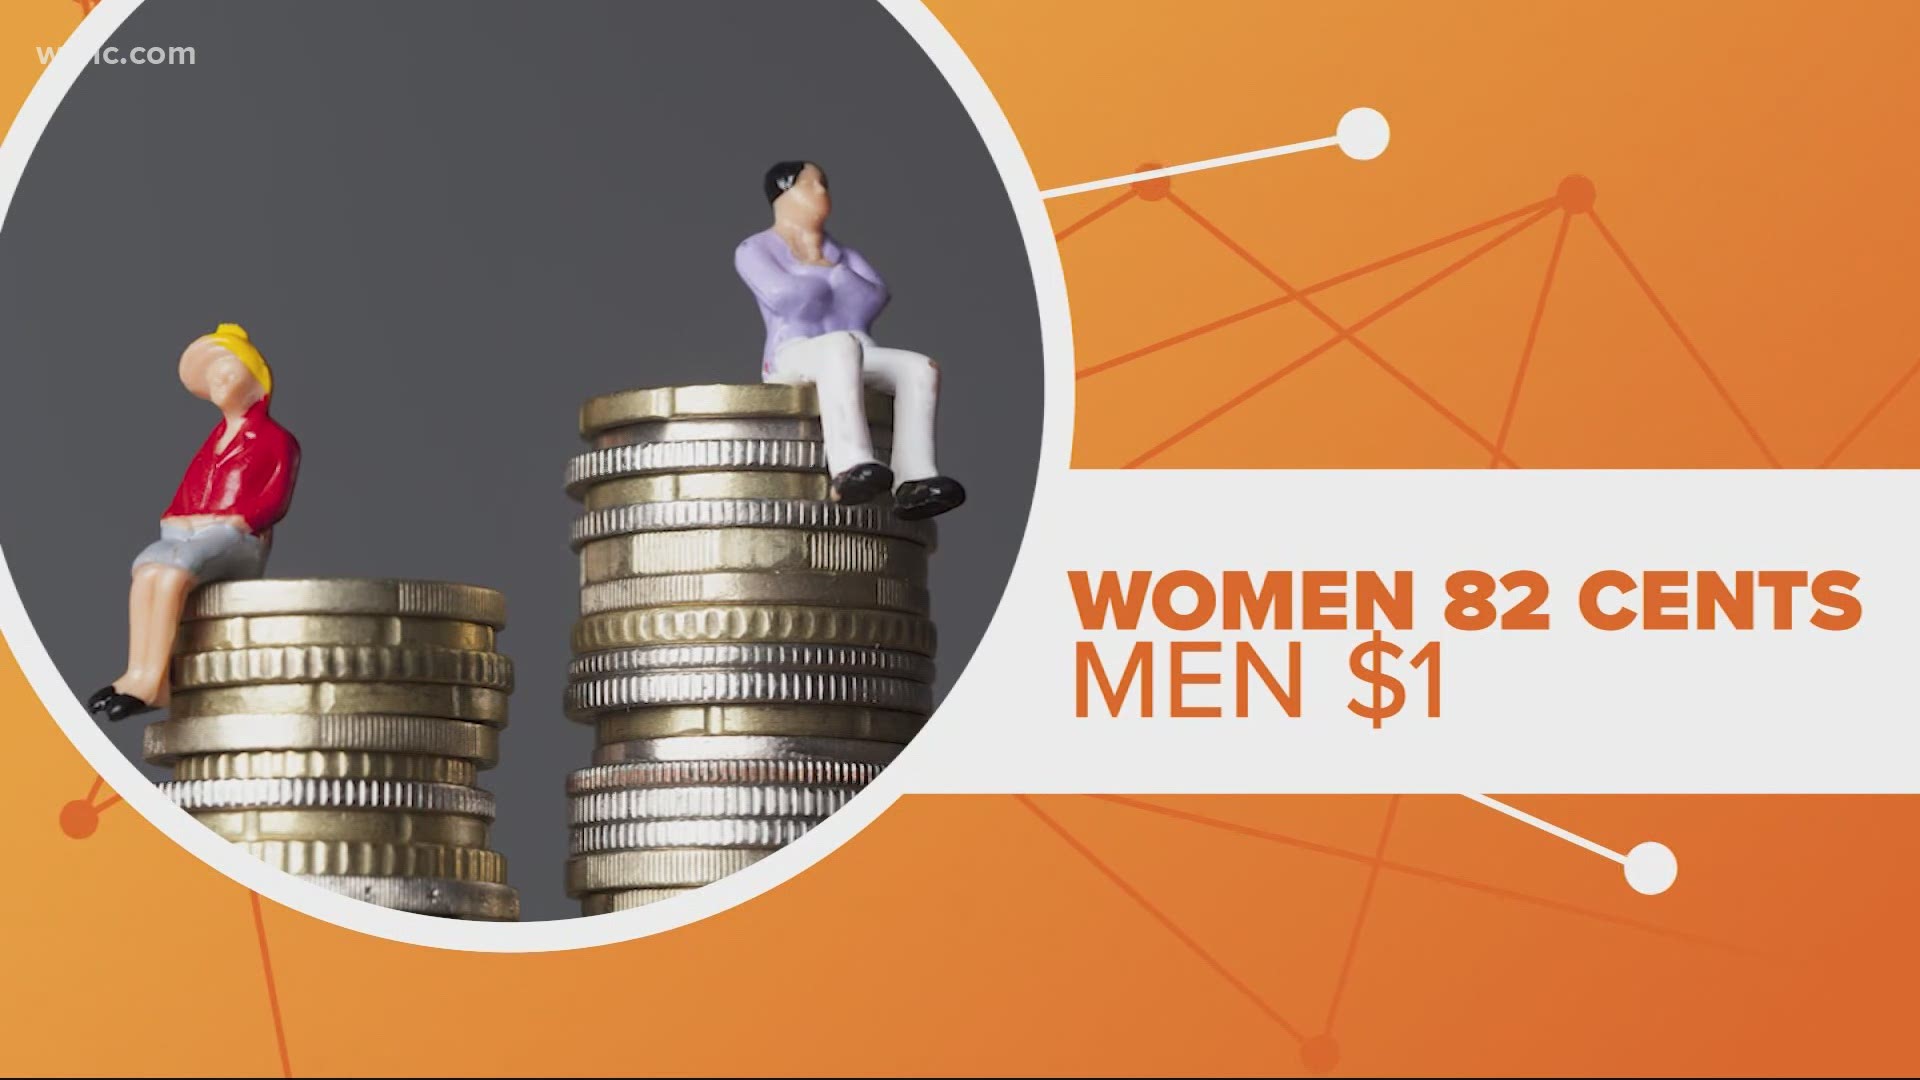 Wednesday is Equal Pay Day, a day to recognize the wage gap between men and women. And the numbers are especially bad this year due to the COVID-19 pandemic.